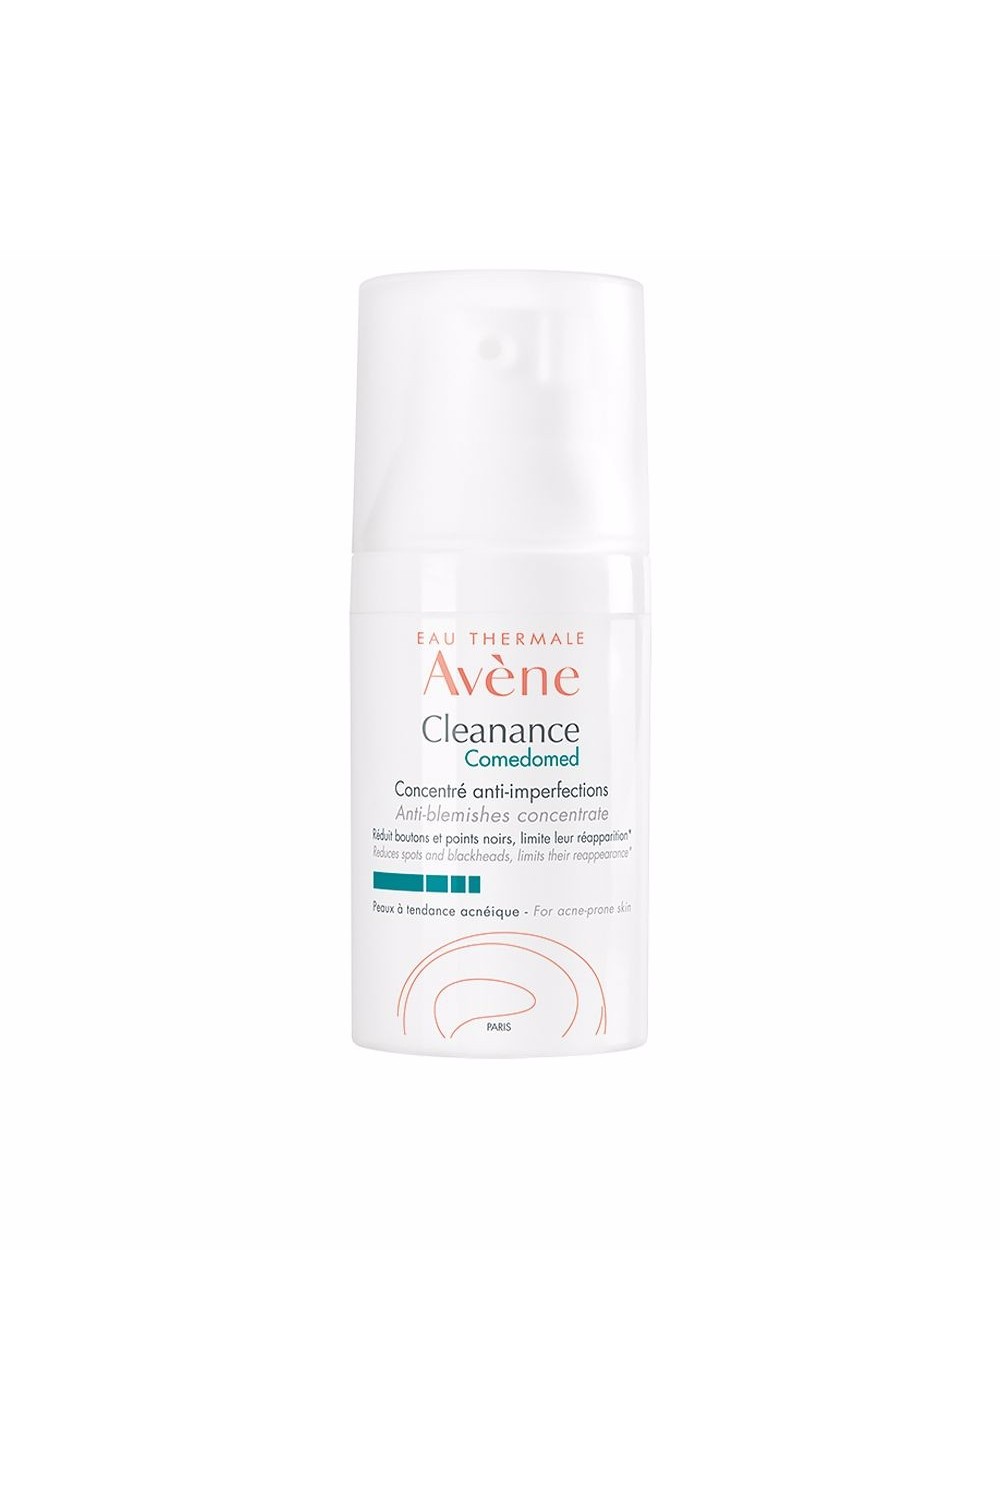 AVÈNE - Avene Cleanance Comedomed Concentrate Anti-imperfections 30ml